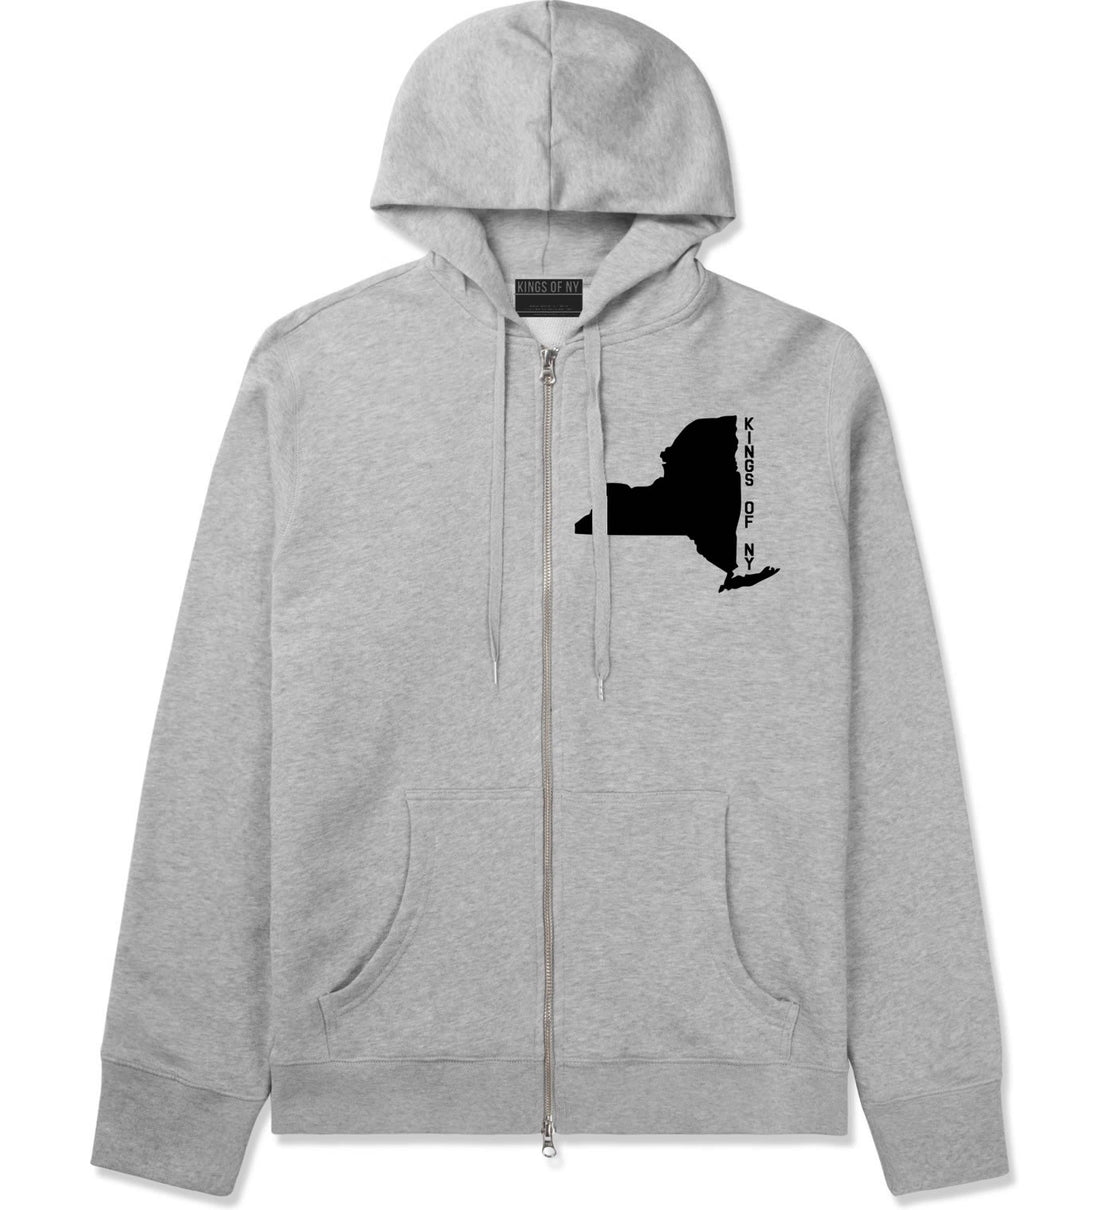 New York State Shape Zip Up Hoodie in Grey By Kings Of NY